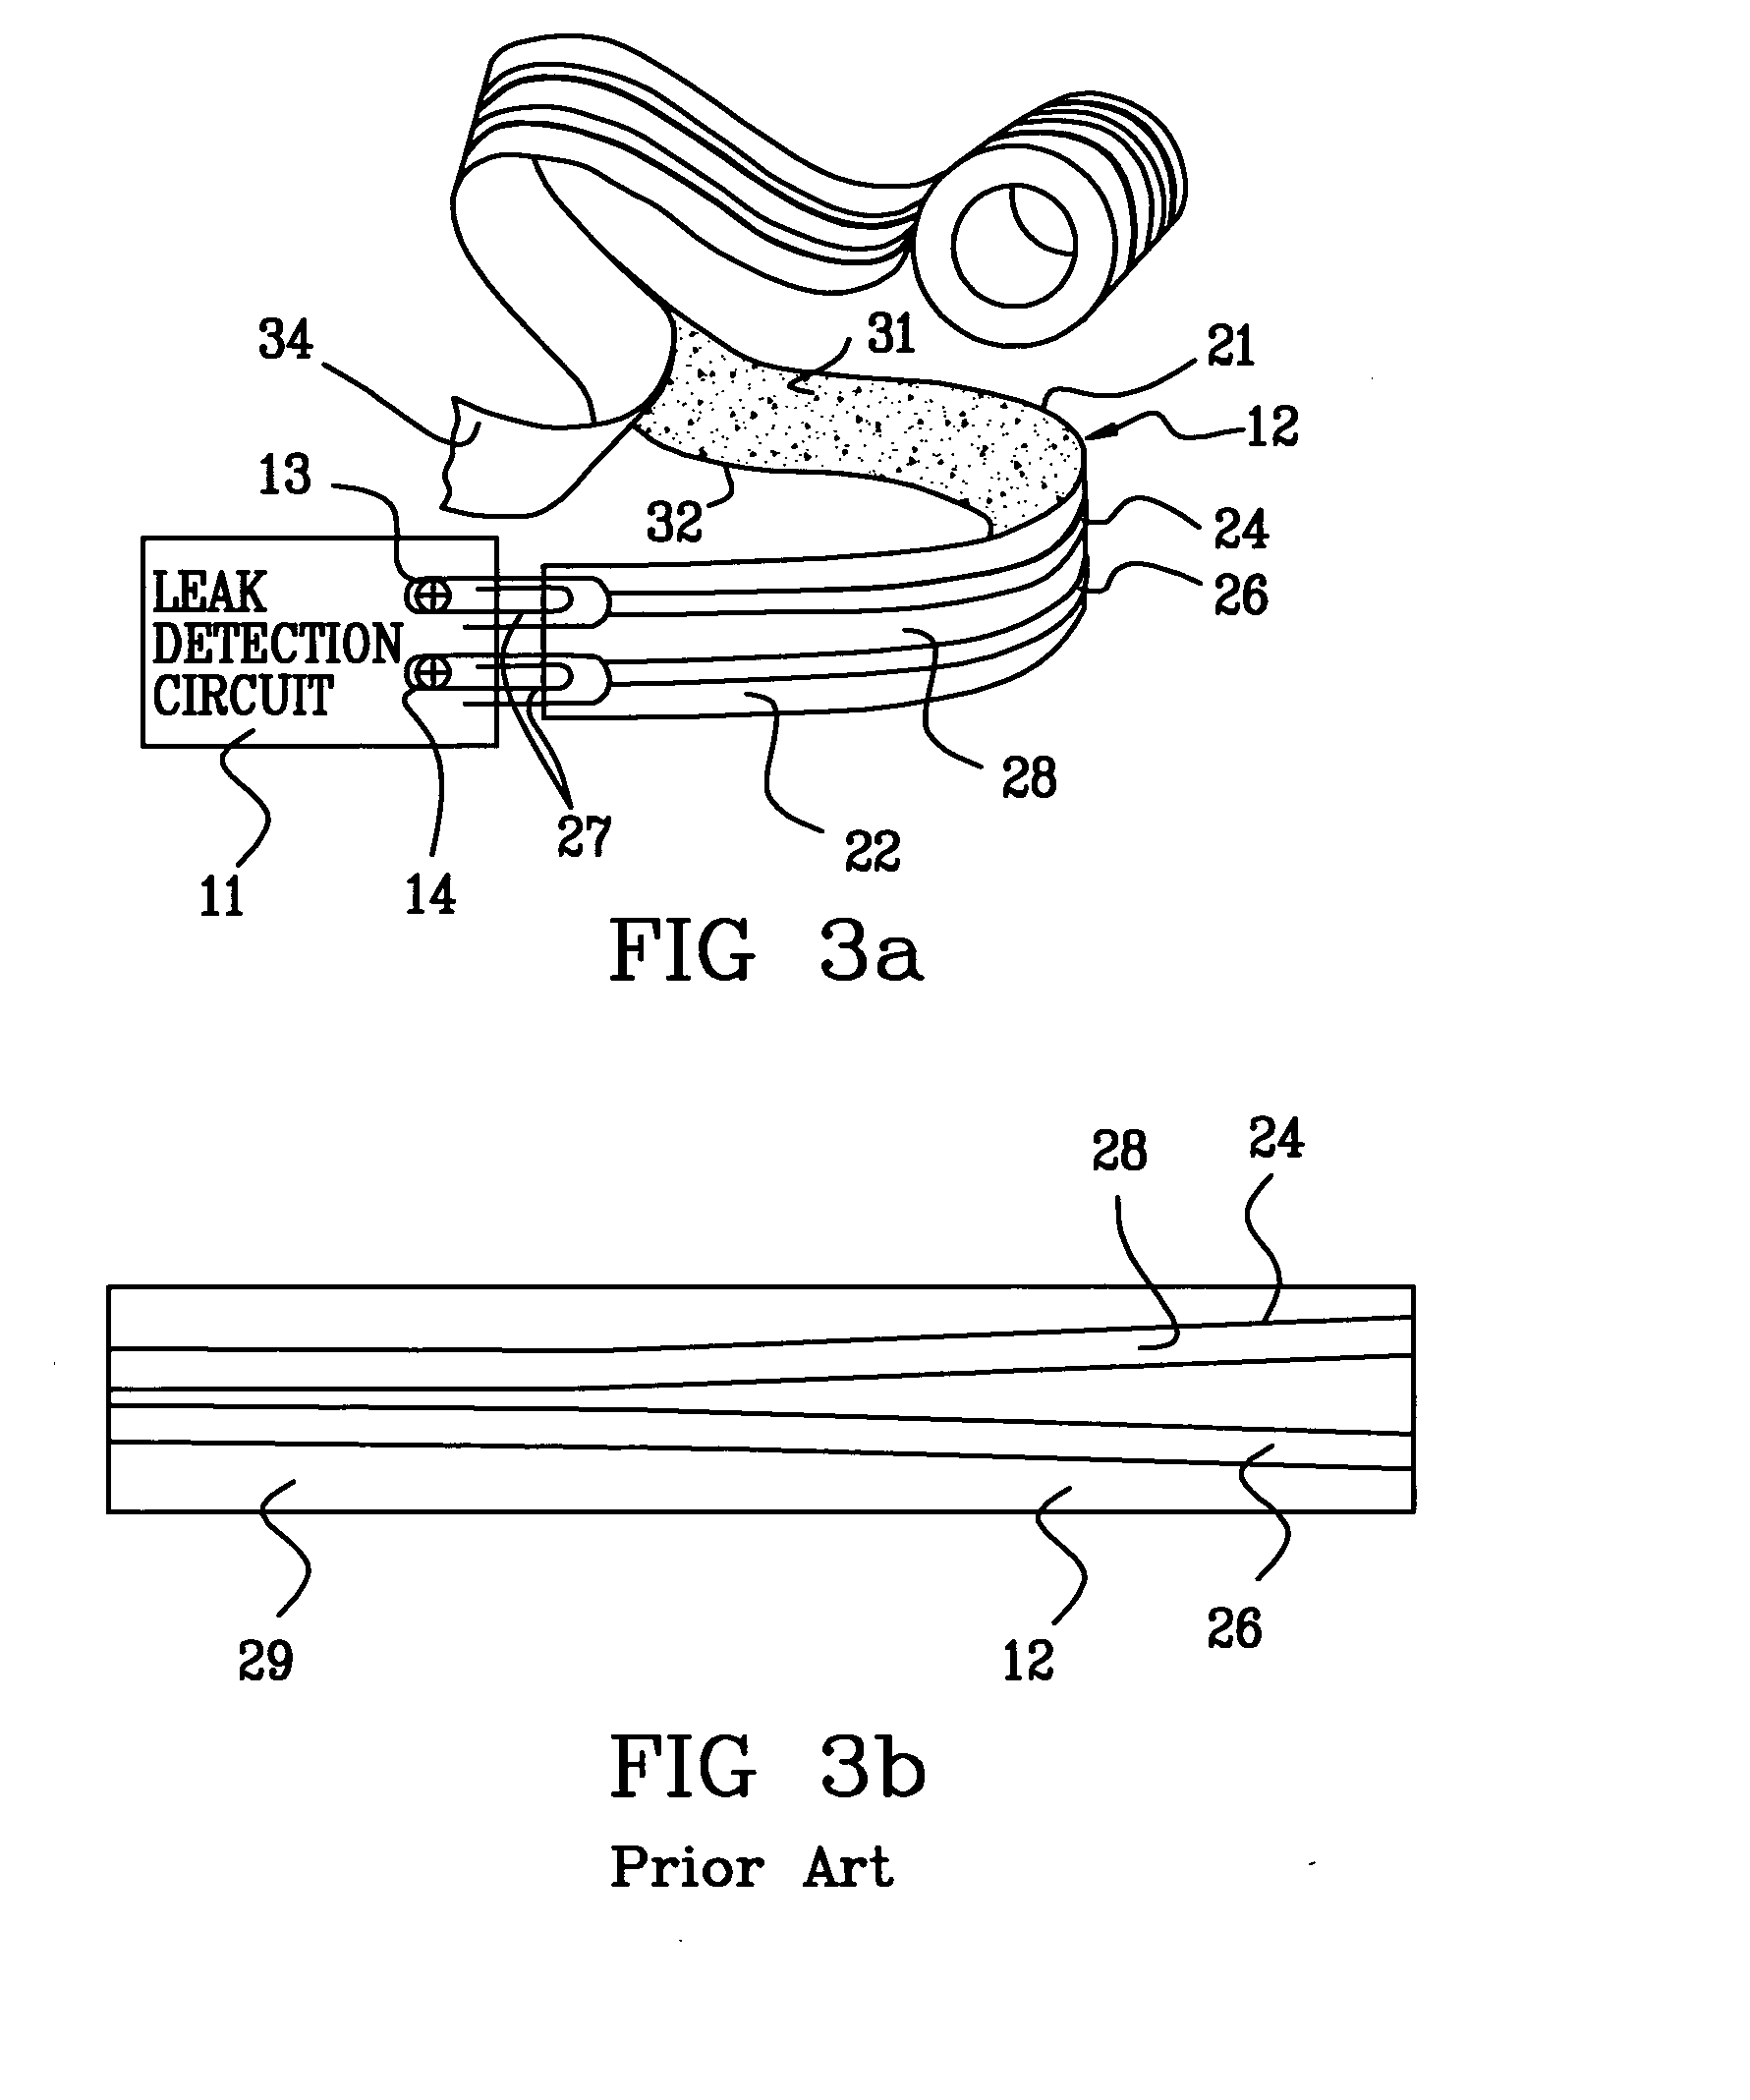 Probe for fluid leak detection with specific distal part